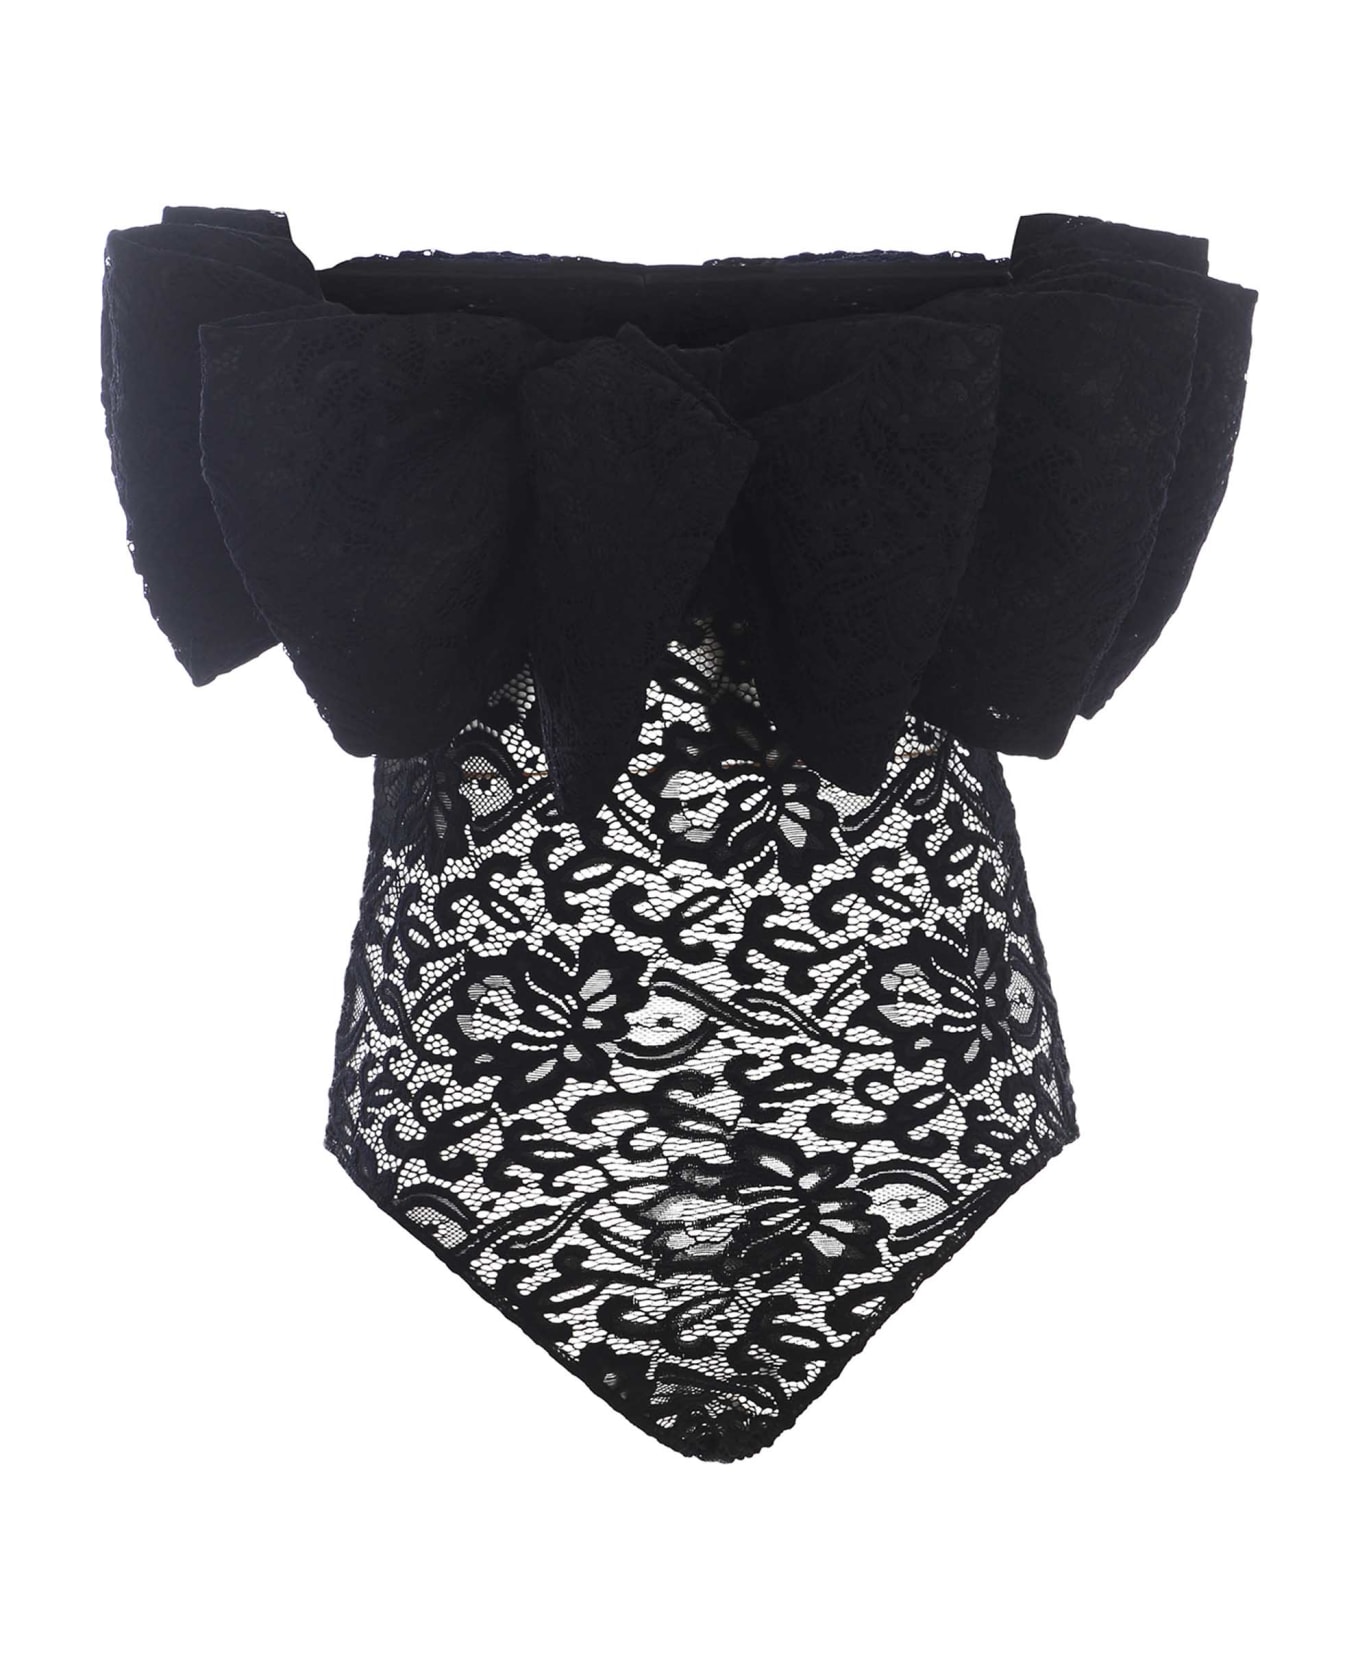 Rotate by Birger Christensen Body Rotate "bow" Made Of Lace - Nero